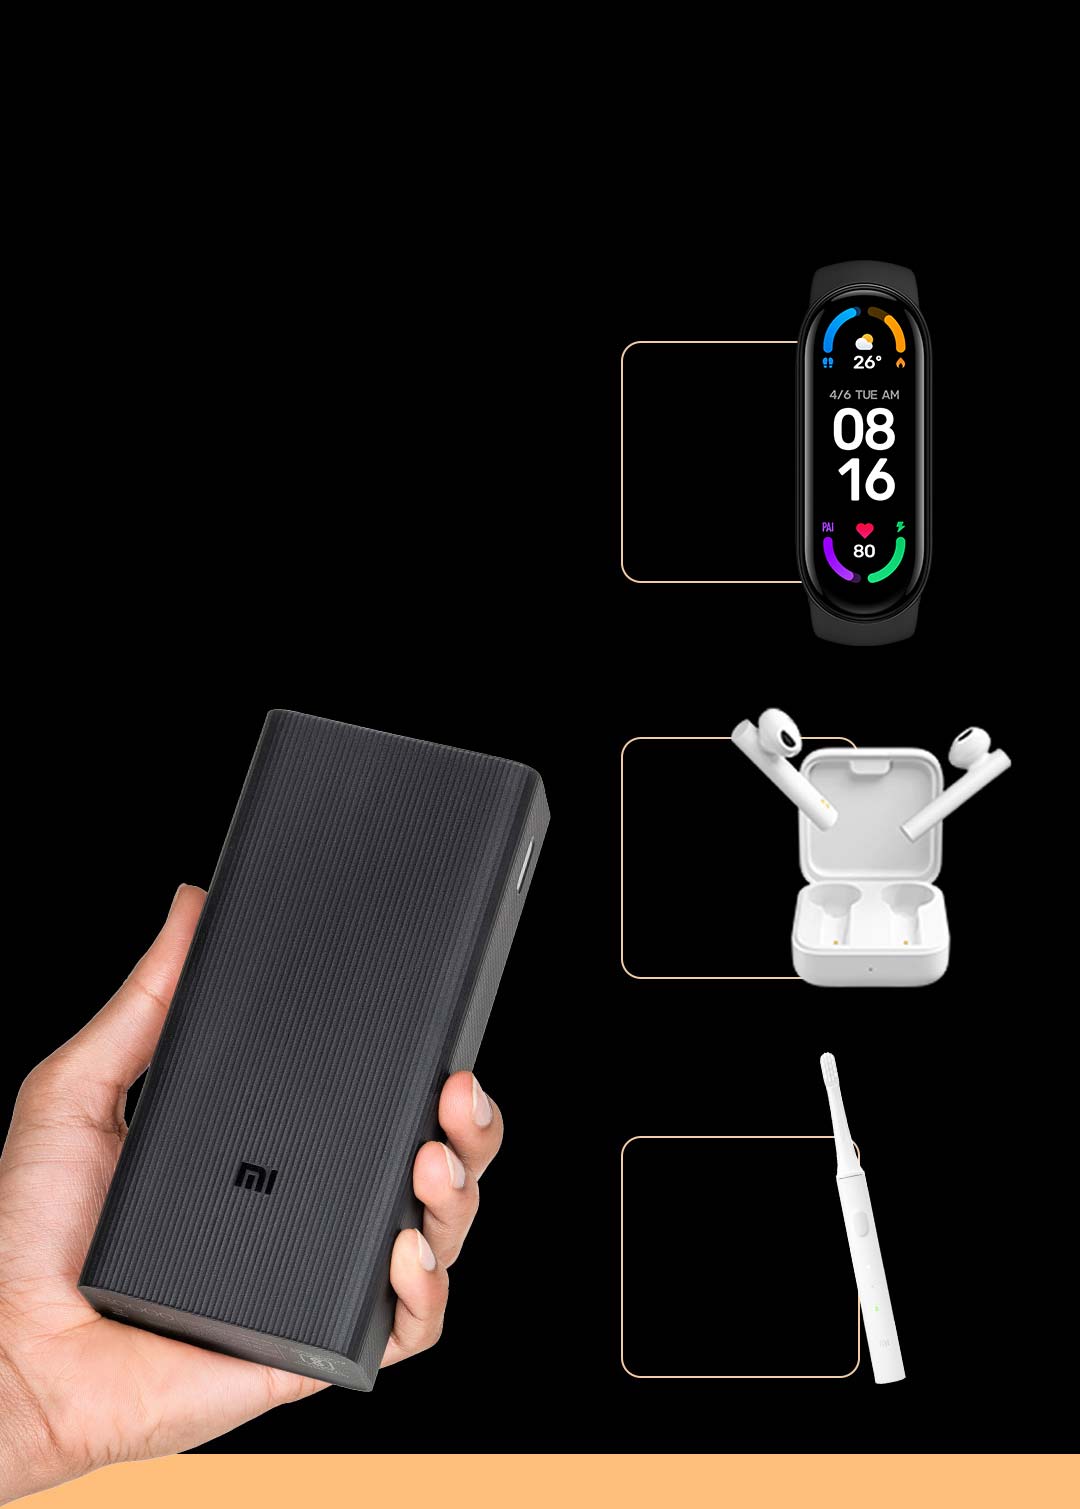 Mainbankxiaomi Power Bank 30000mah With Built-in Cables, 18w Fast Charging